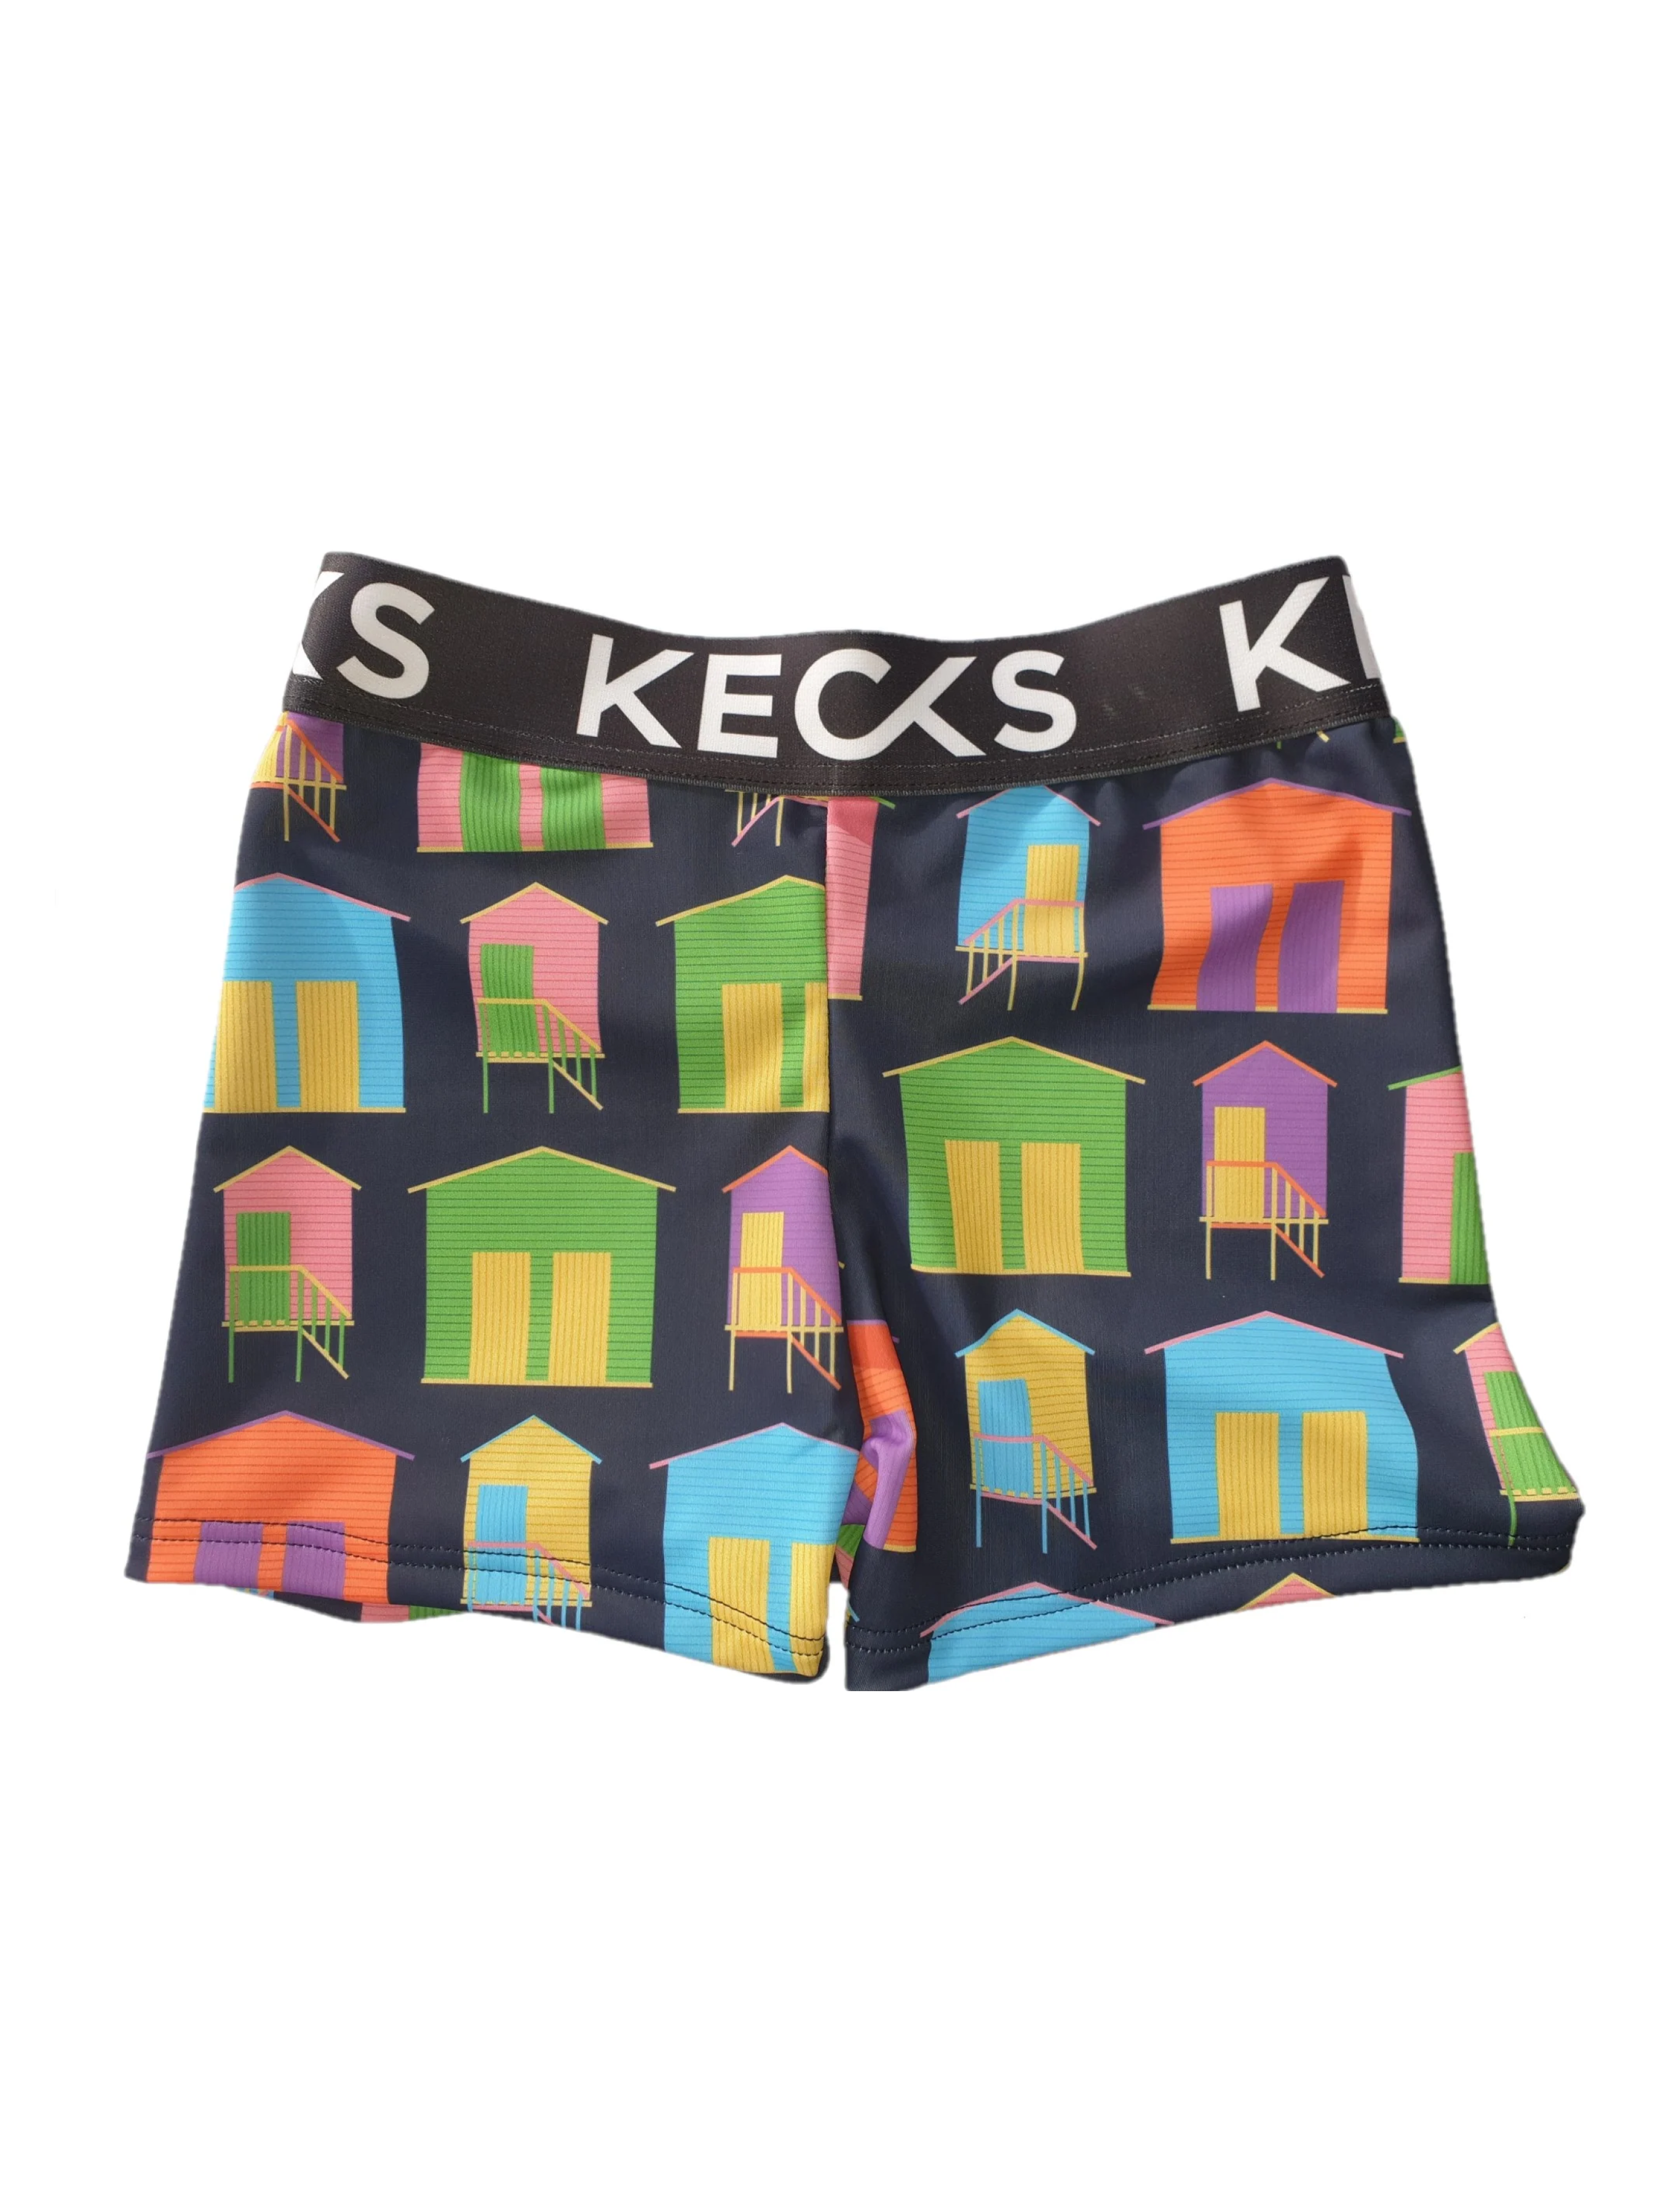 Kids Kecks - made with the same colourful and stretchy material as